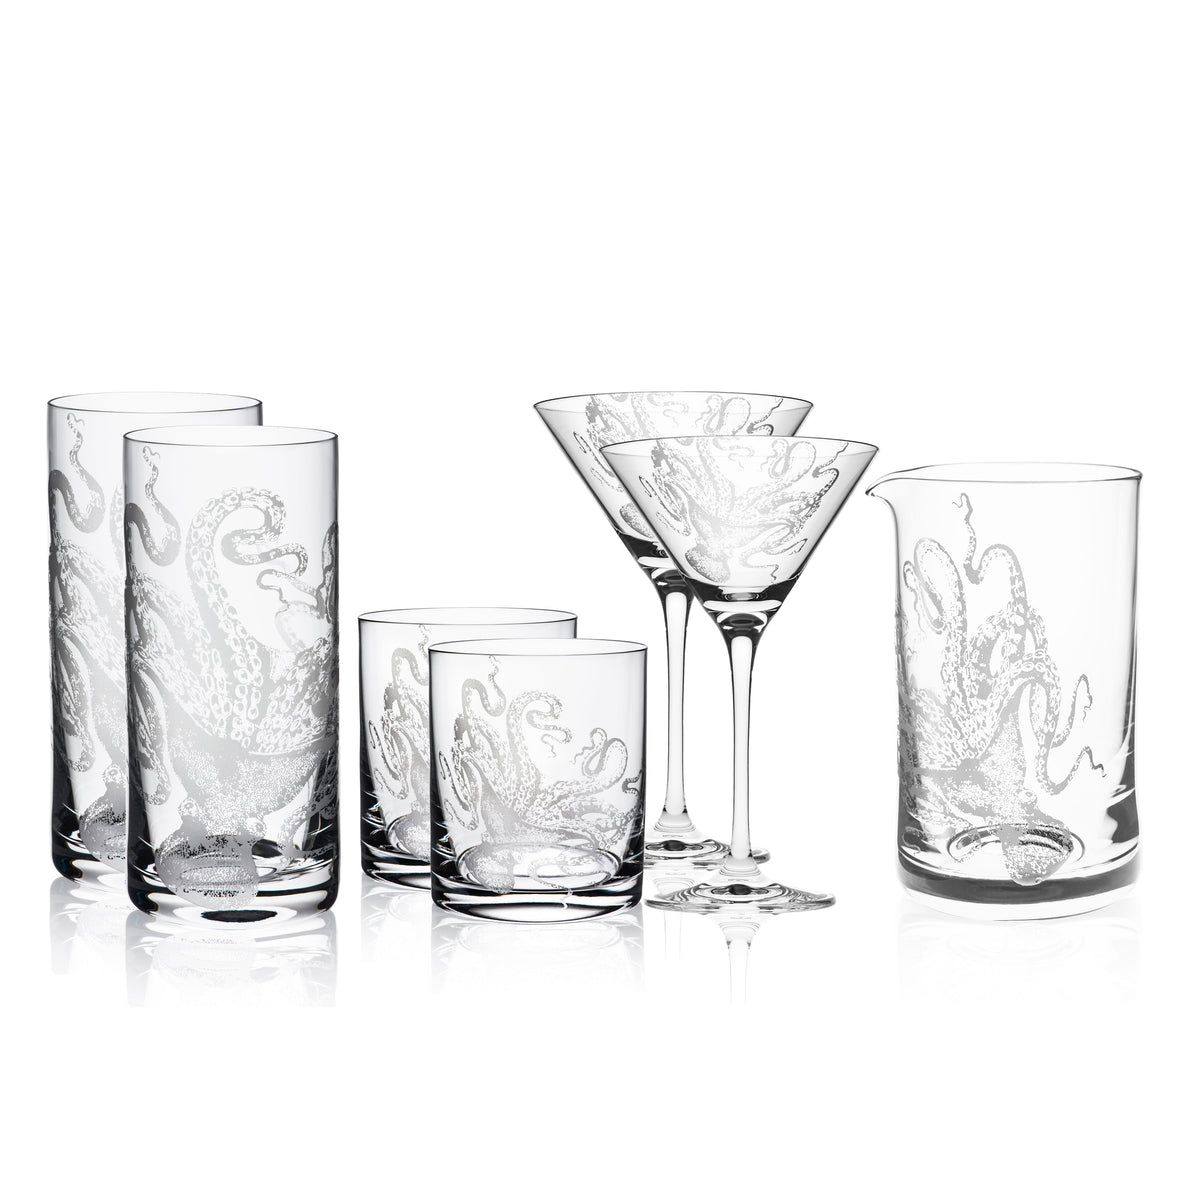 Caskata Artisanal Home&#39;s Lucy Highball Glasses, hand-etched tall glasses featuring the Lucy the octopus design.